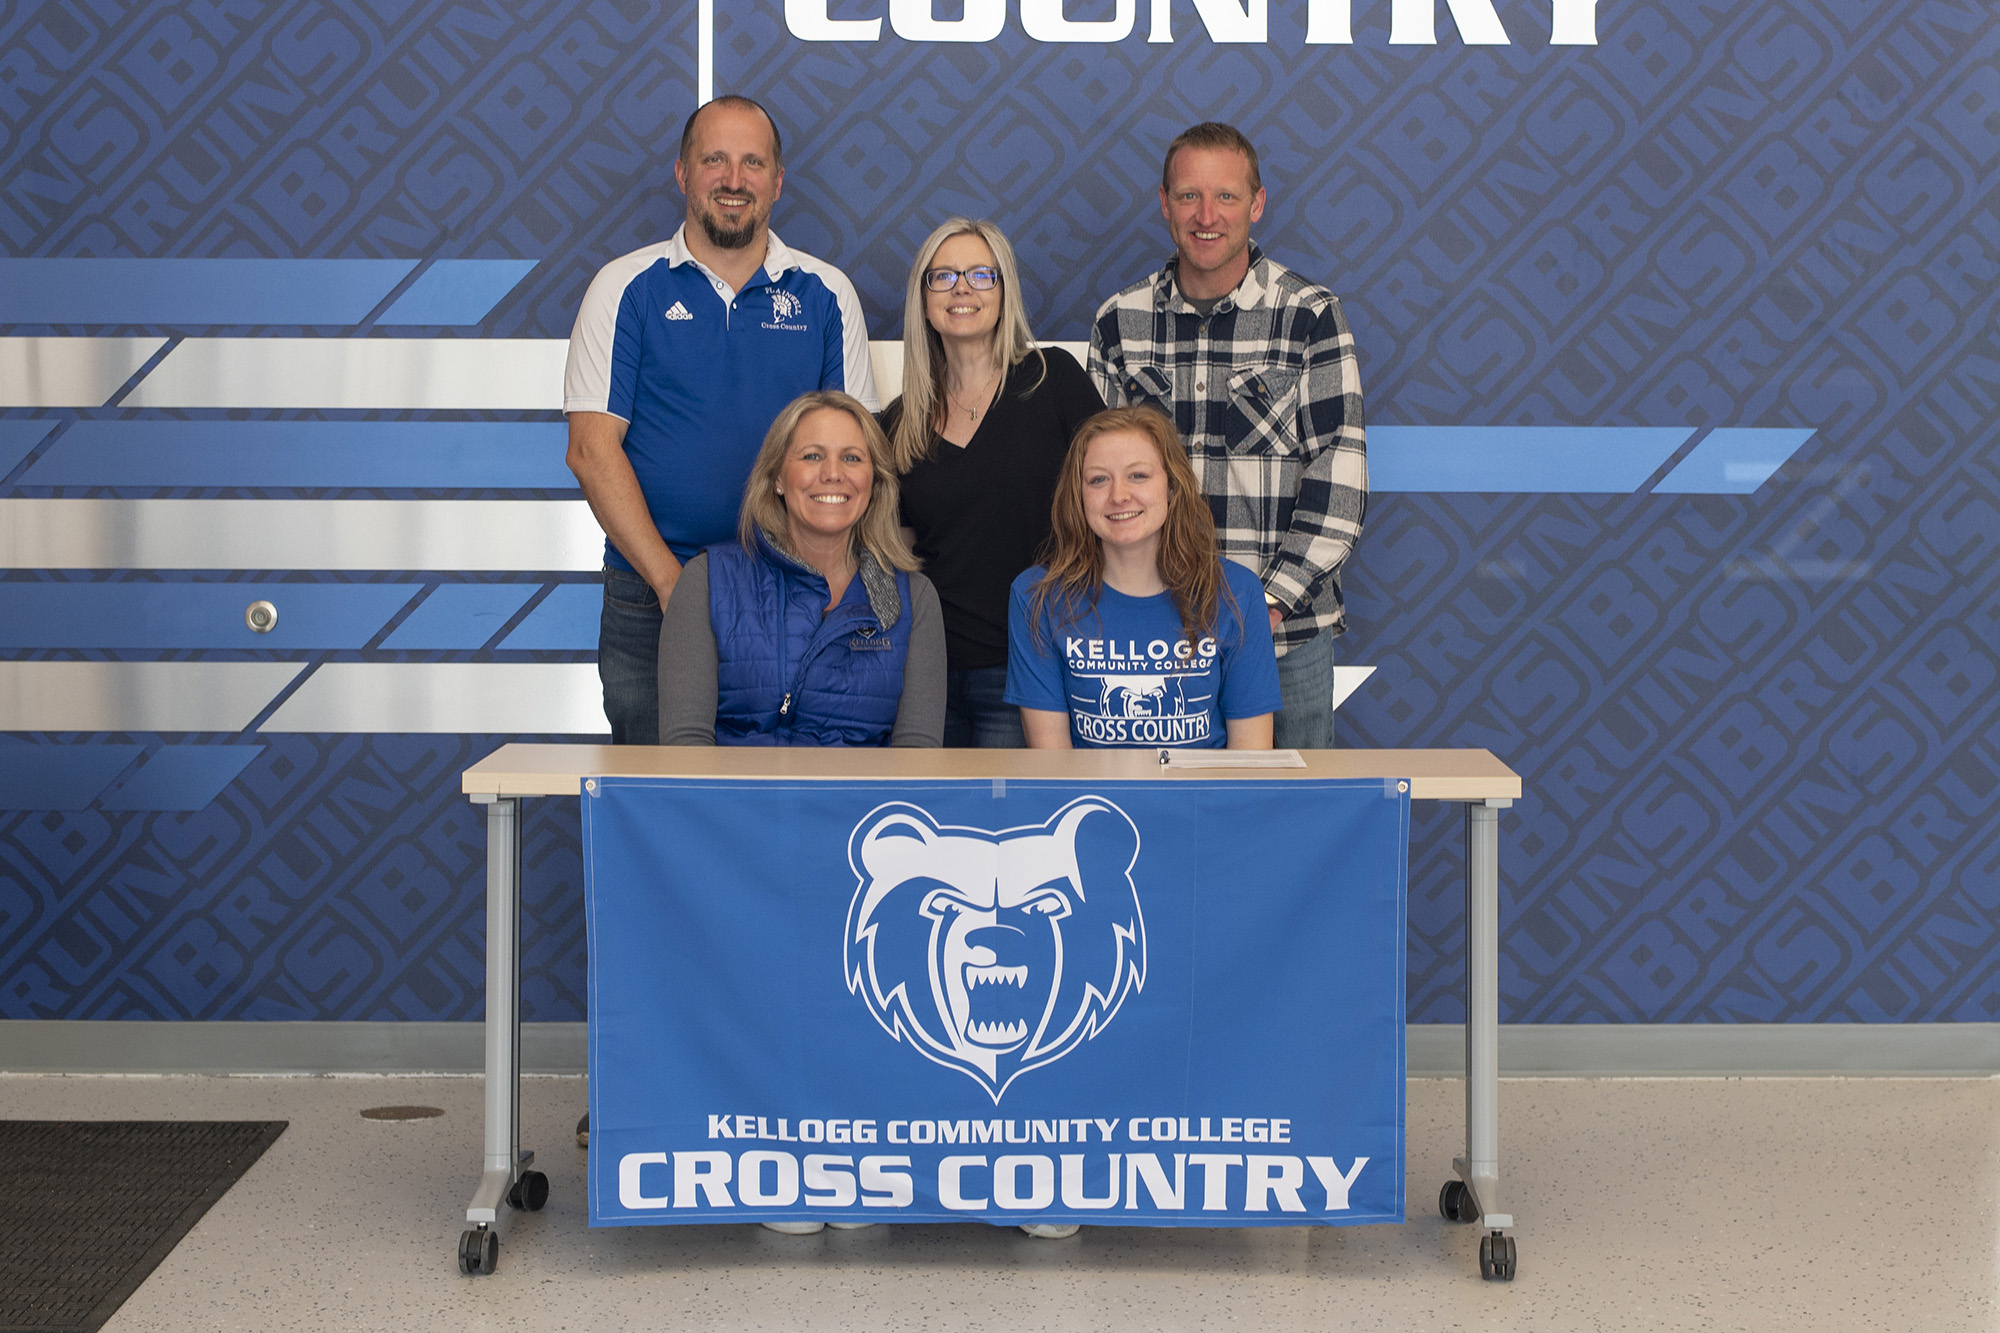 In the front row, from left to right, are Head KCC Cross-Country Coach Erin Lane and Kennedy VanderLugt. In the back row, from left to right, are Plainwell High School Girls Cross-Country Coach Brett Beier, Jeanna VanderLugt (mother) and Ben VanderLugt (father).